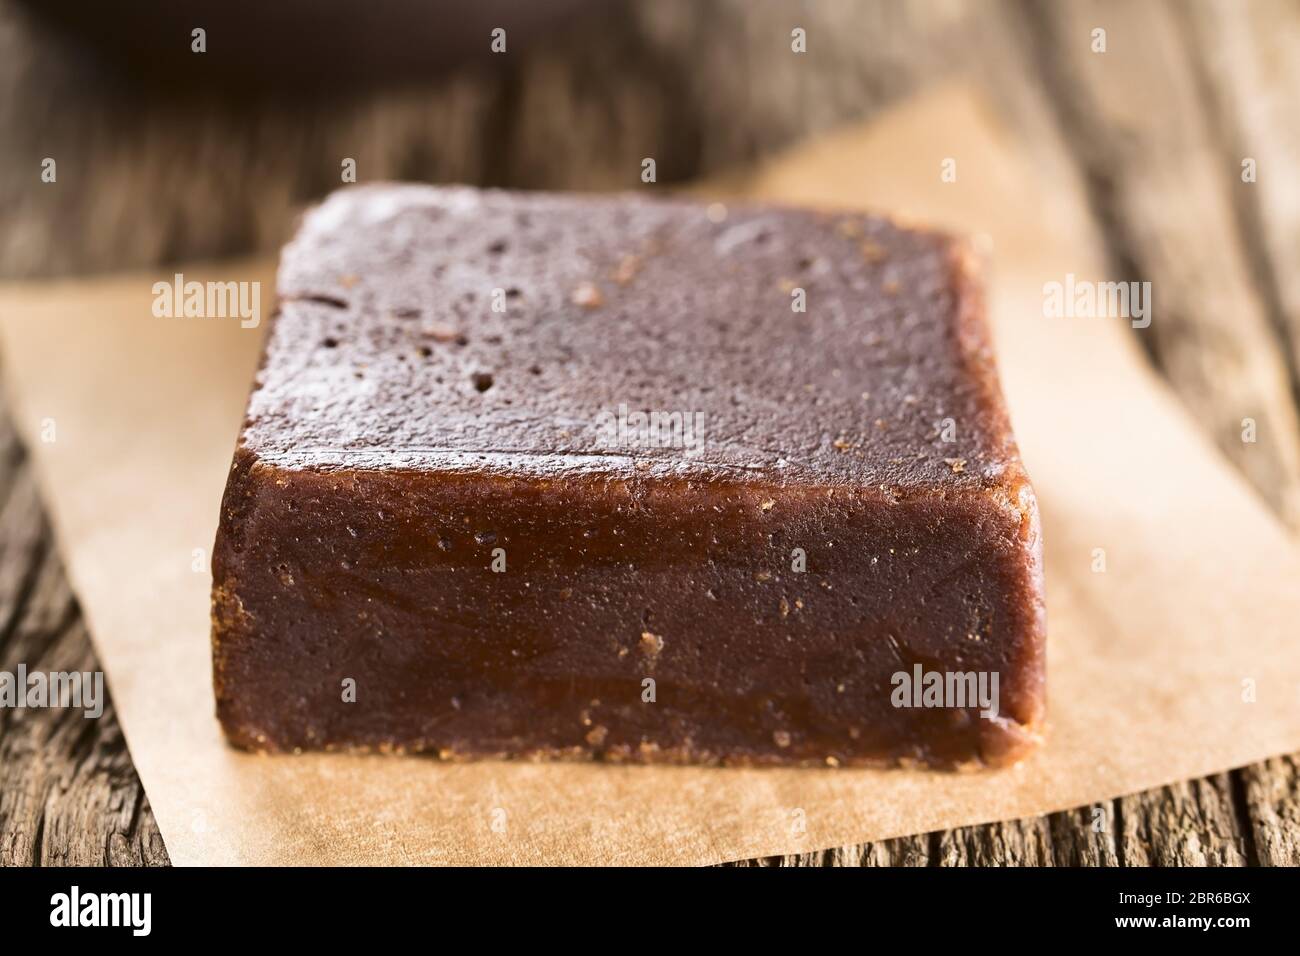 Block of chancaca or panela raw unrefined sugar made of sugarcane, used in Latin America to prepare sweet sauces and other sweets (Selective Focus, Fo Stock Photo